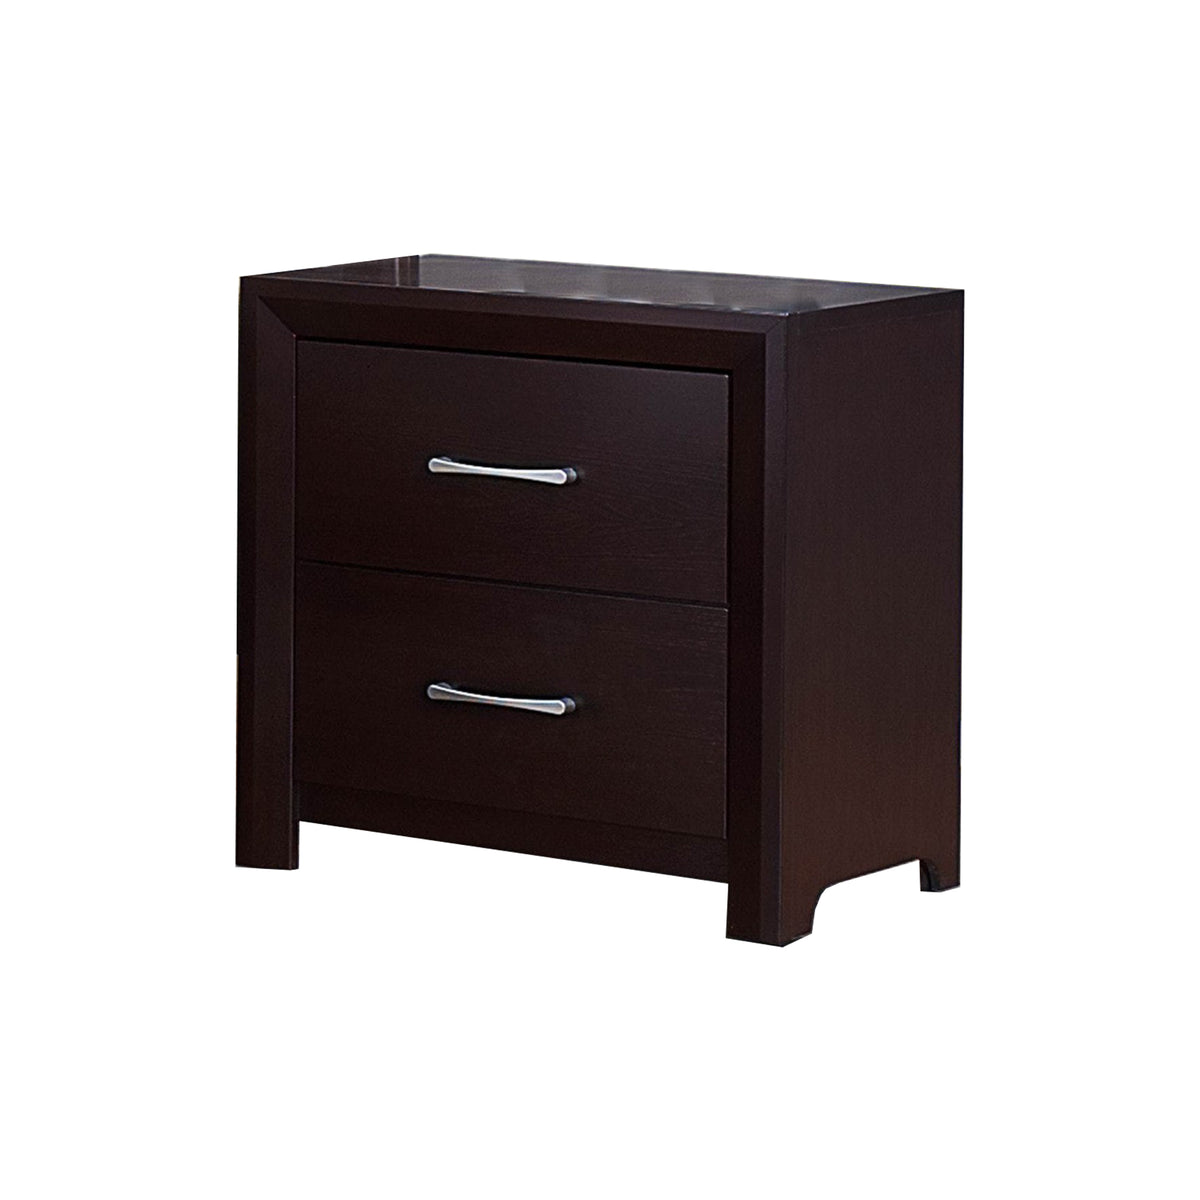 BM174480 Wooden Night Stand with 2 Drawers Espresso Brown